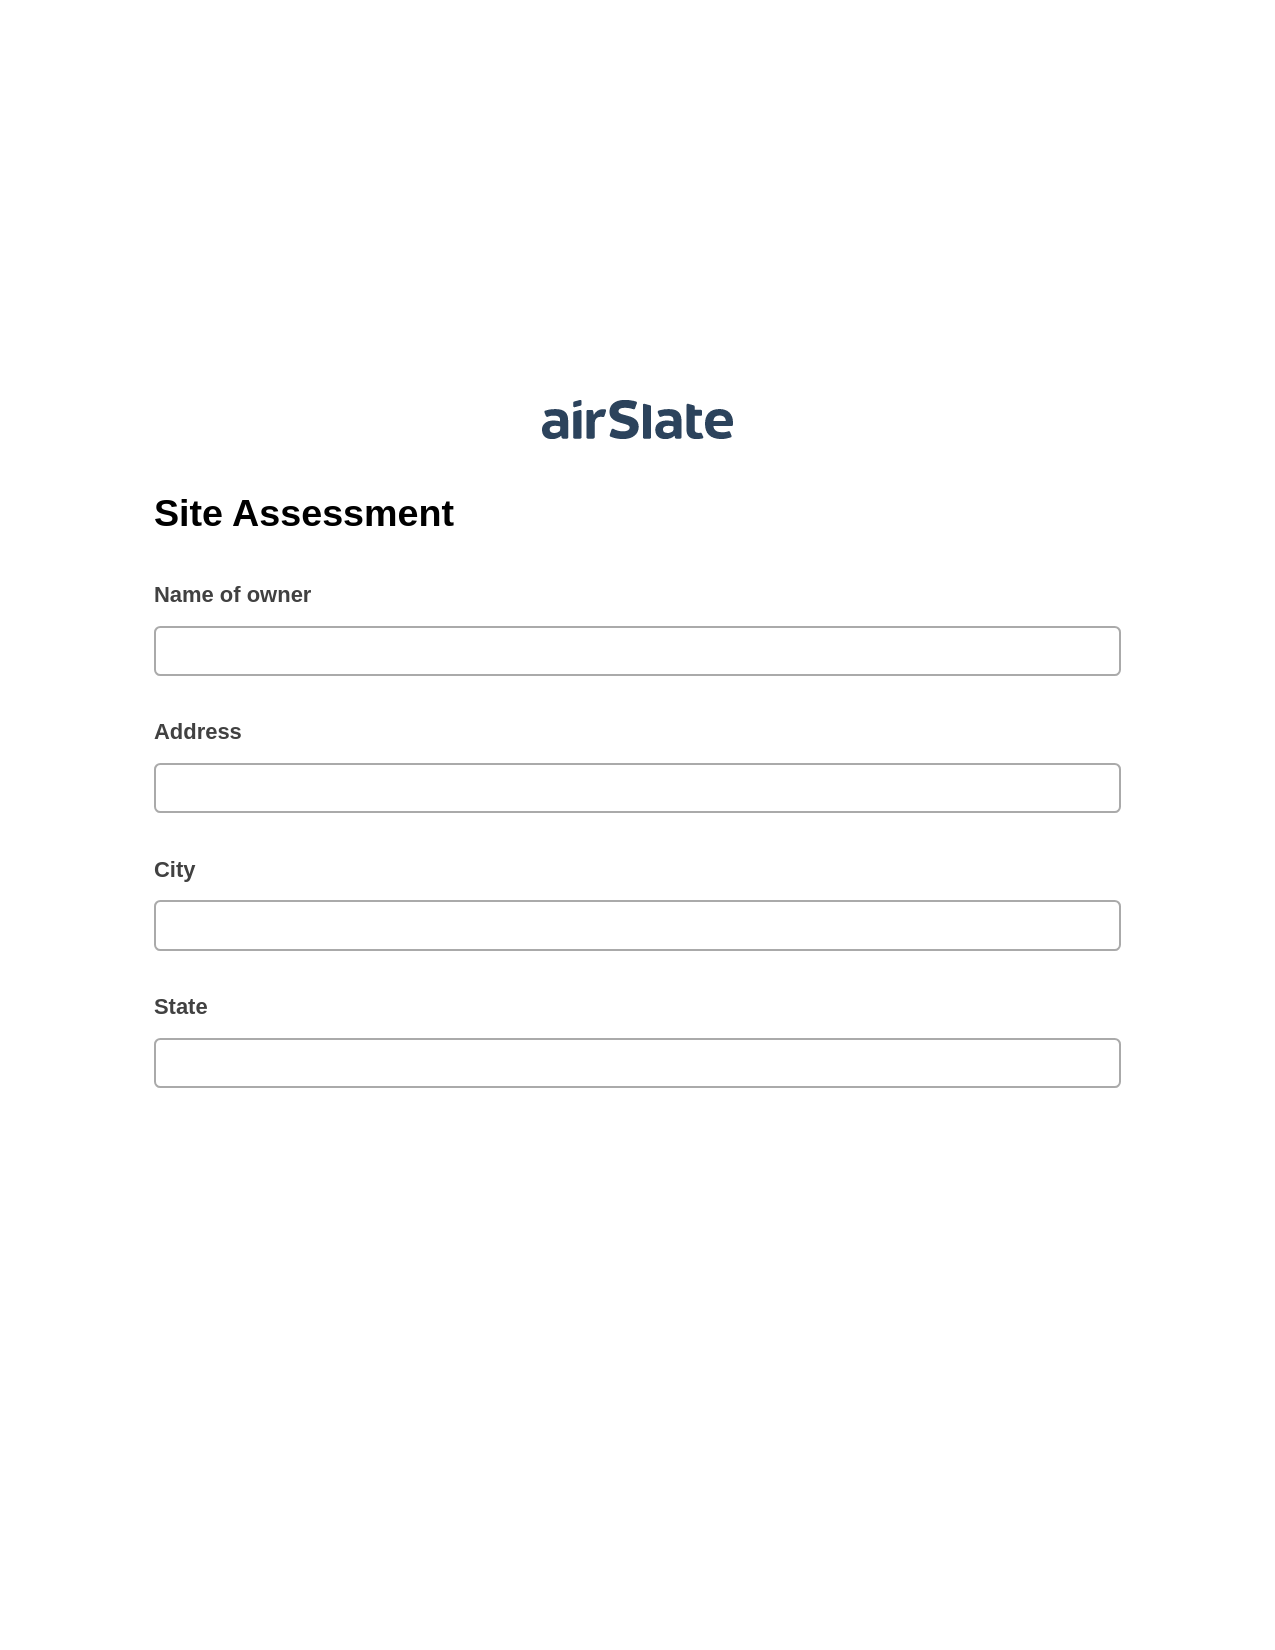 Site Assessment Pre-fill from Salesforce Record Bot, Pre-fill with Custom Data Bot, Archive to SharePoint Folder Bot